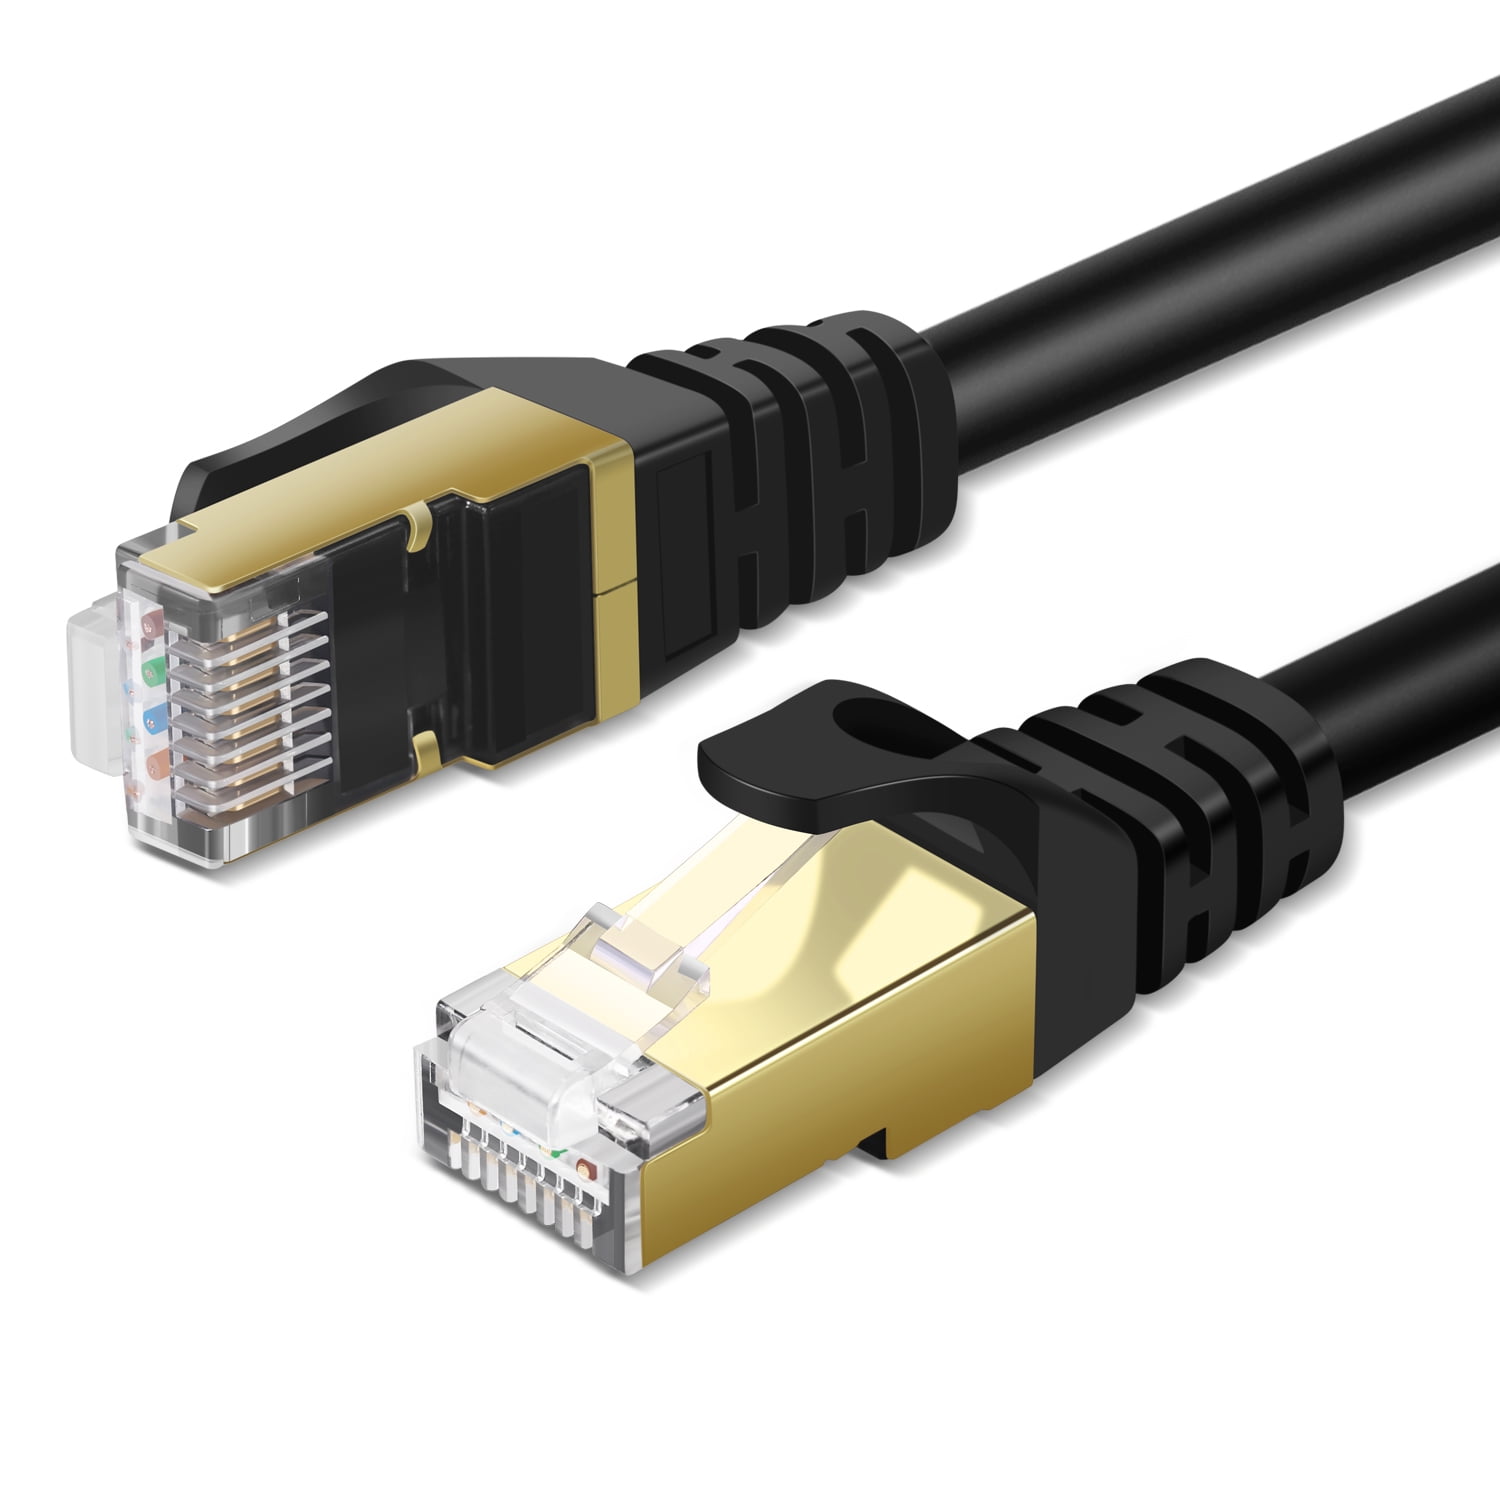 0.5m， Universal RJ45 network LIN Network Cable CAT7-2 Gold-plated CAT7 Flat Ethernet 10 Gigabit Two-color Braided Network LAN Cable for Modem Router LAN Network Length with Shielded RJ45 Connectors